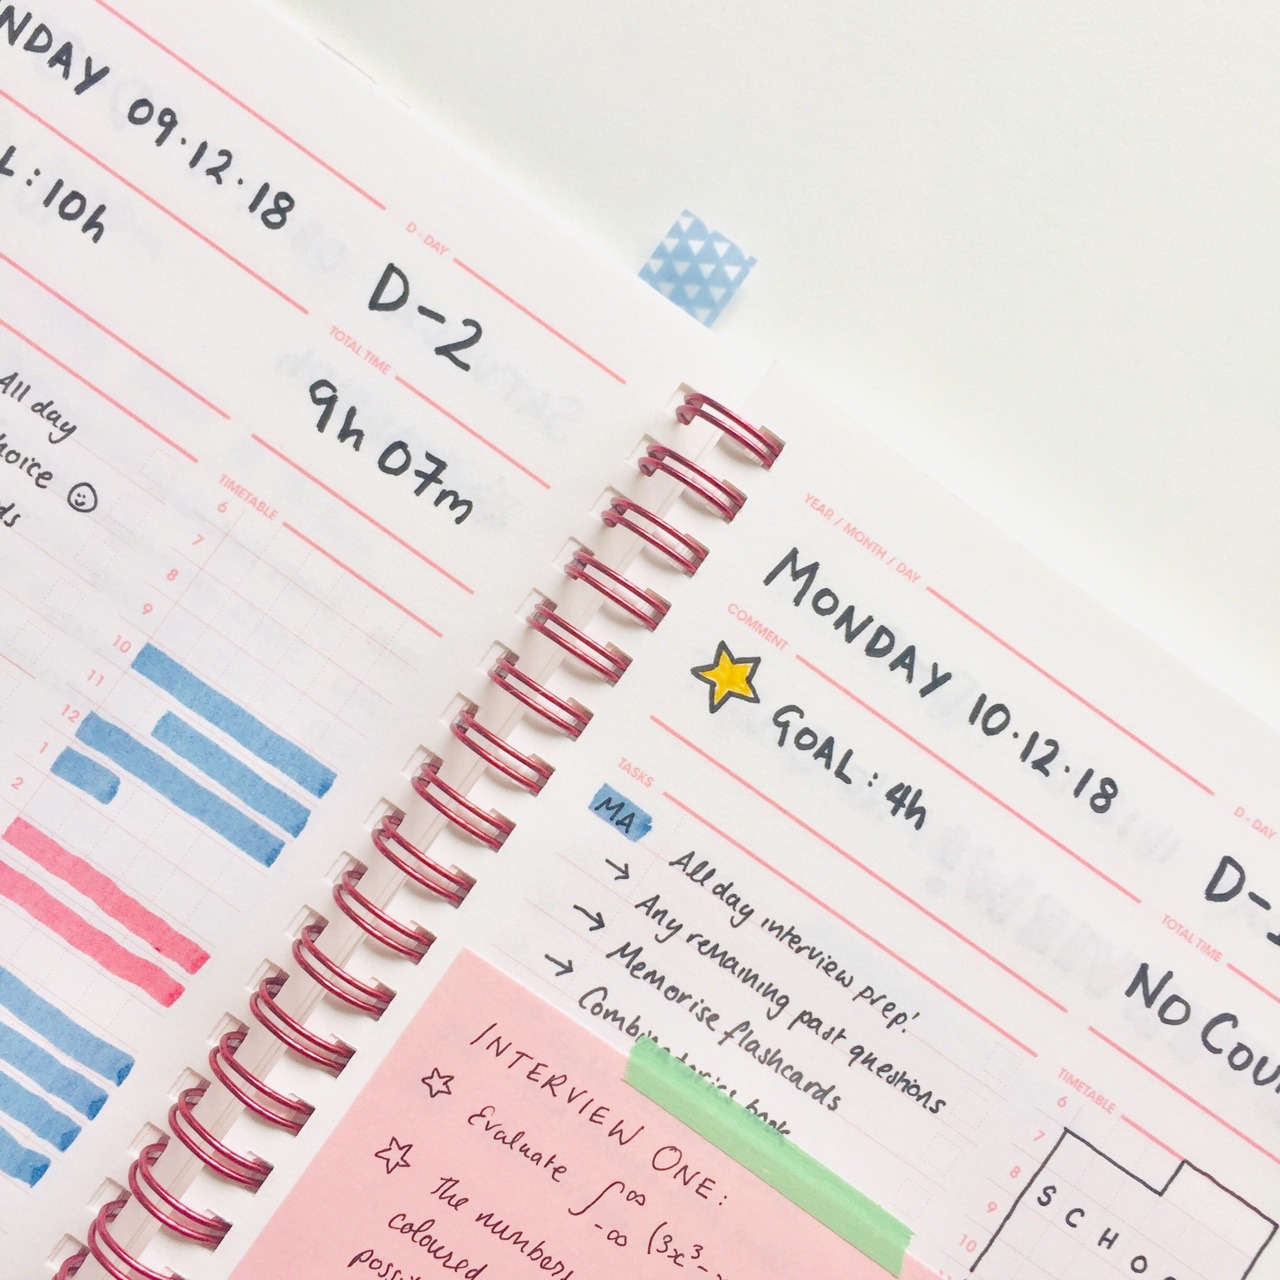 Study Planner By Motemote 10 Minutes Planner for 100 Days